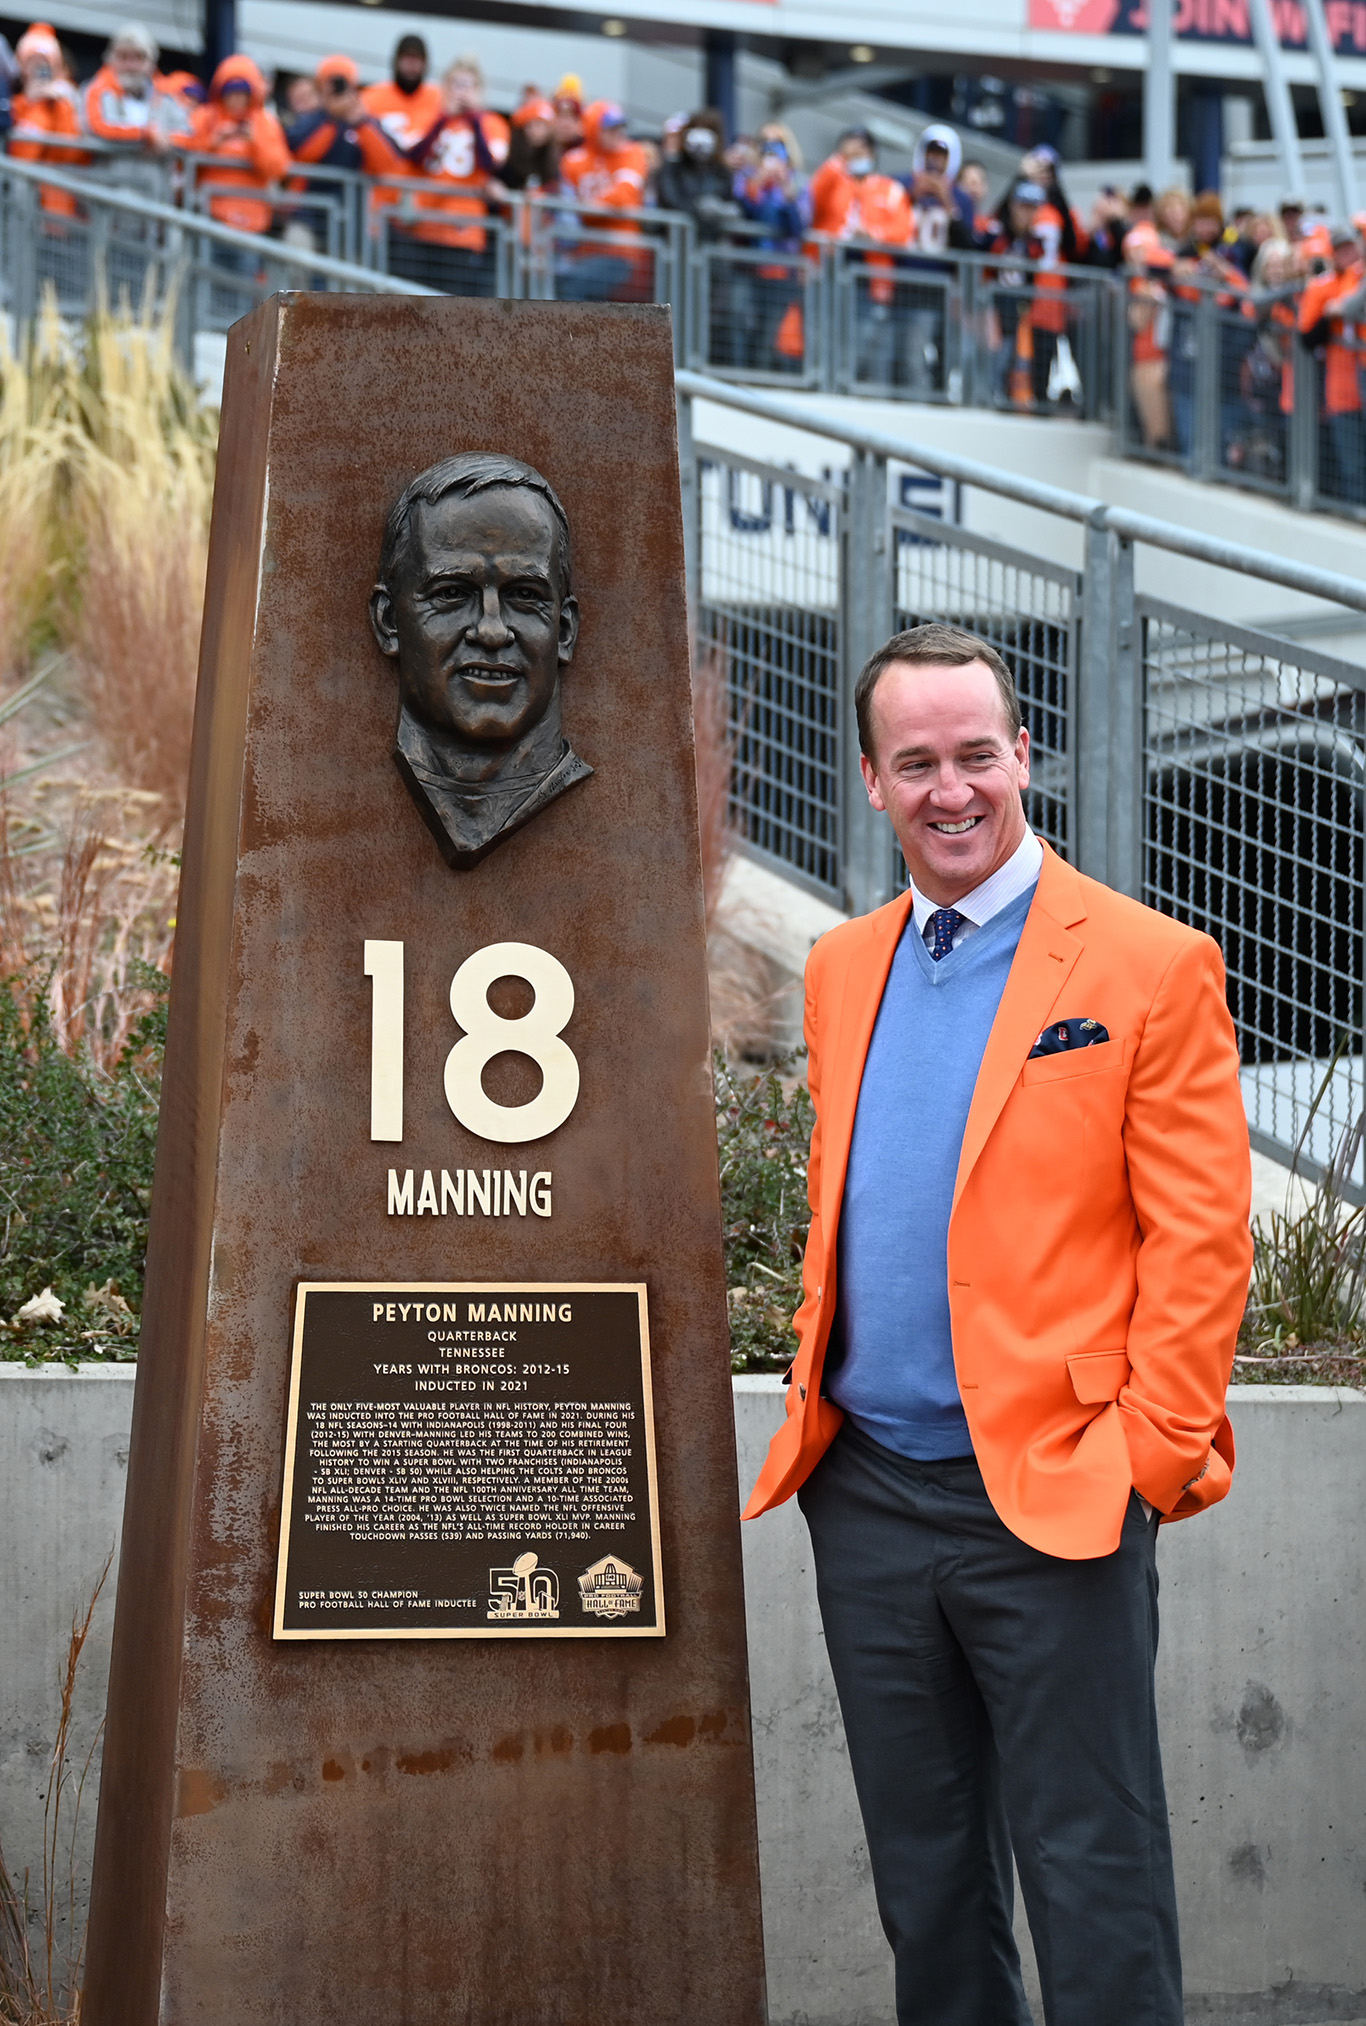 Peyton Manning is inducted into the Broncos Ring of Fame on October 31, 2021.